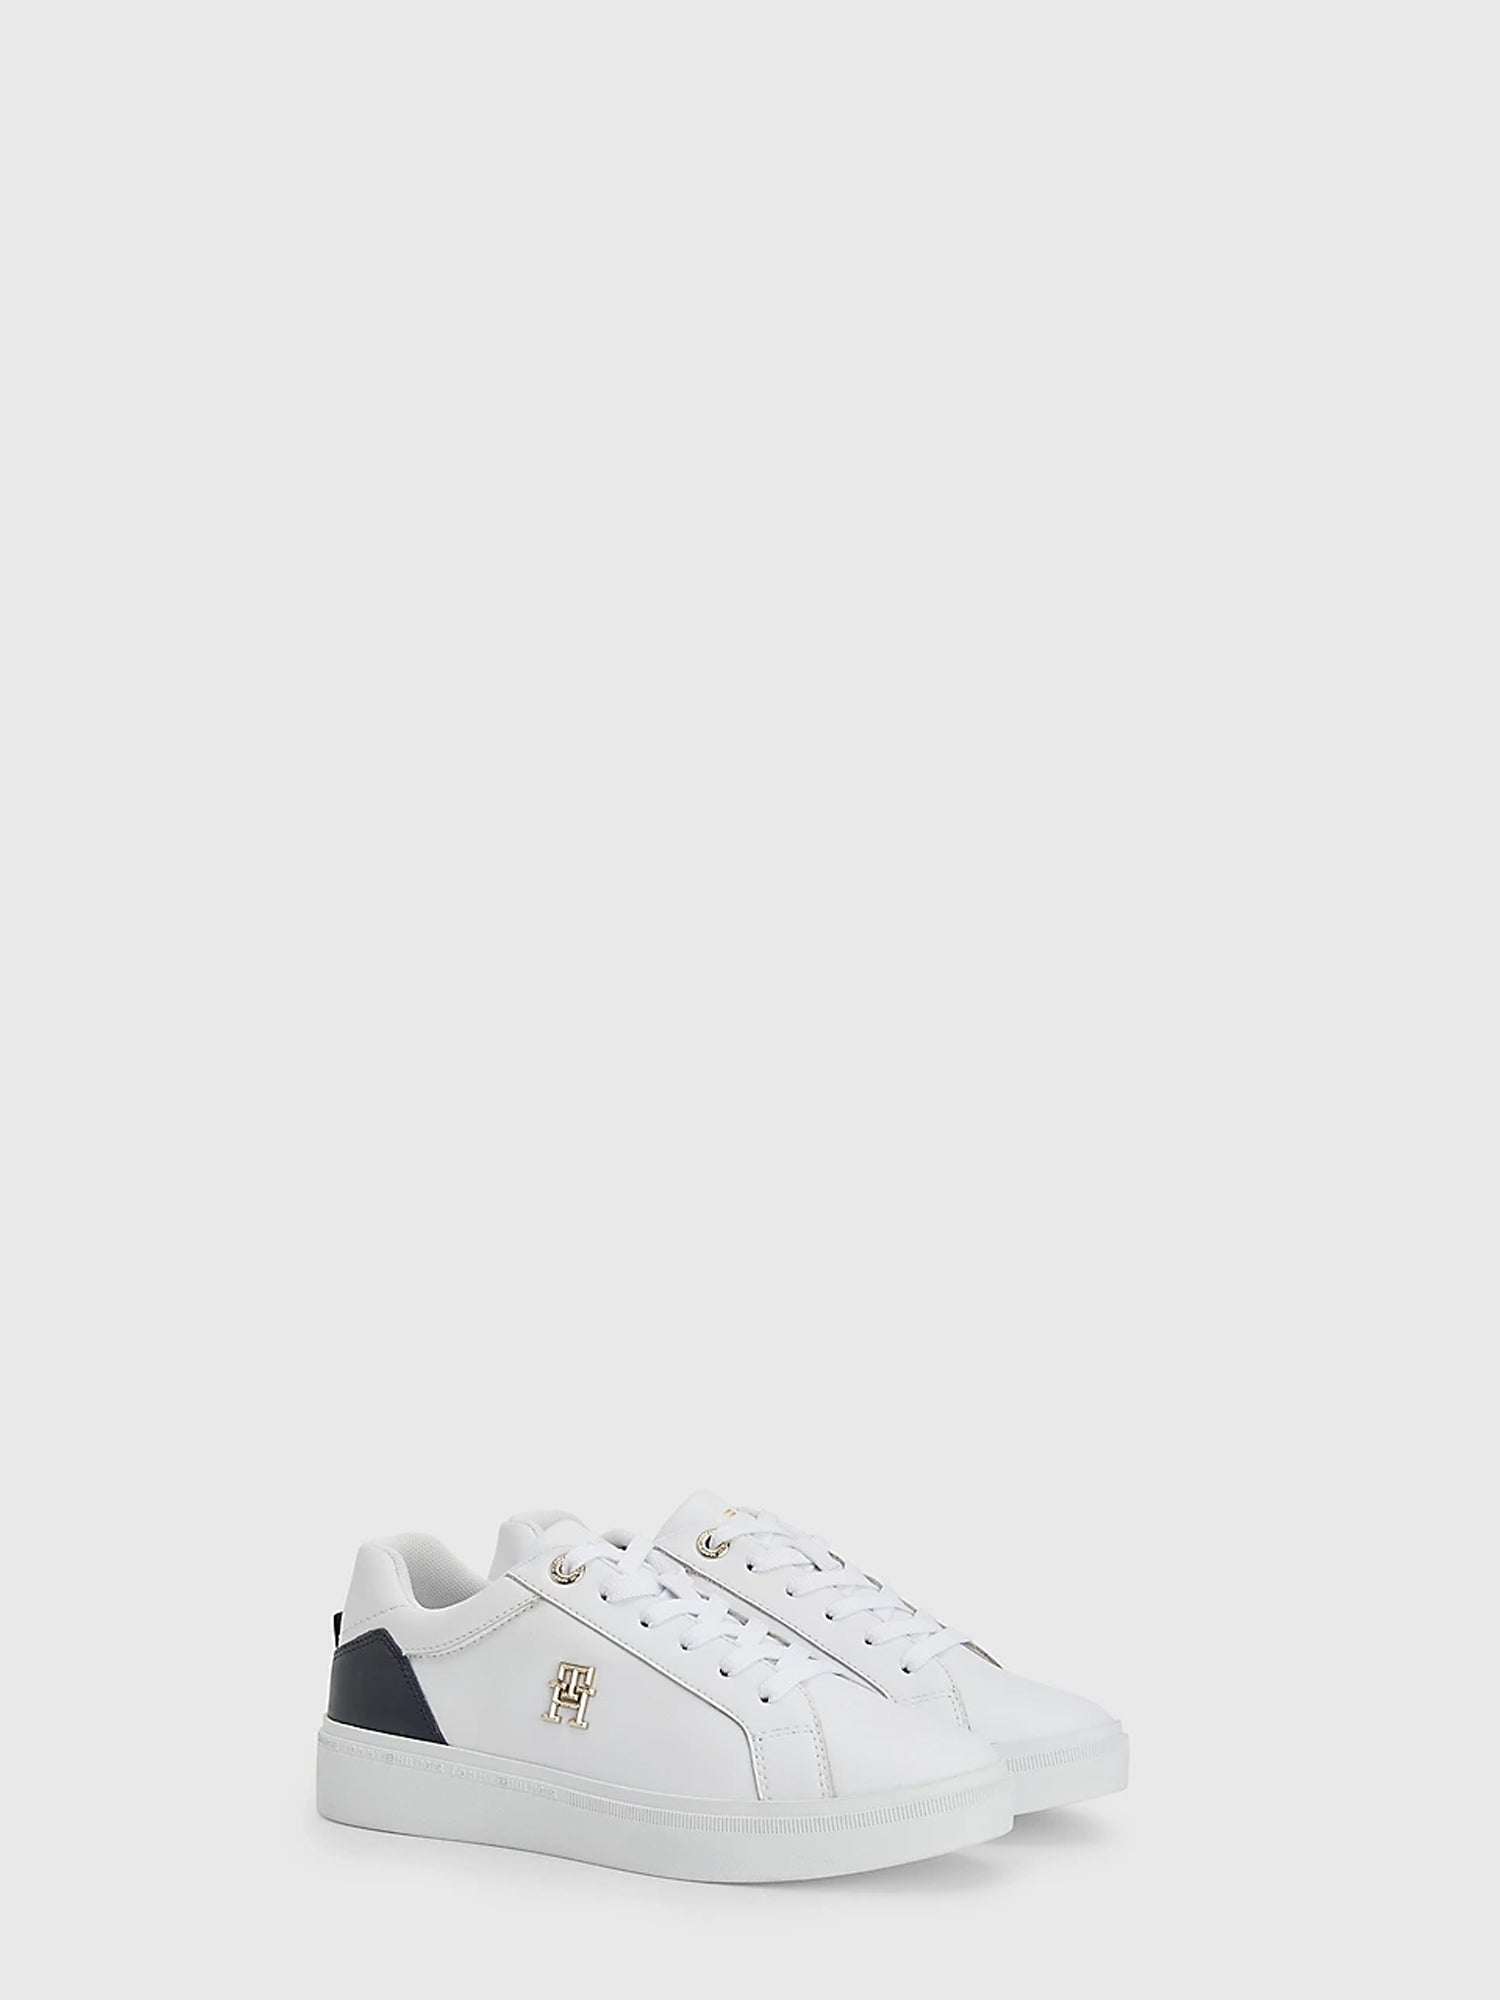 TOMMY HILFIGER SHOES SNEAKERS COURT BIANCO